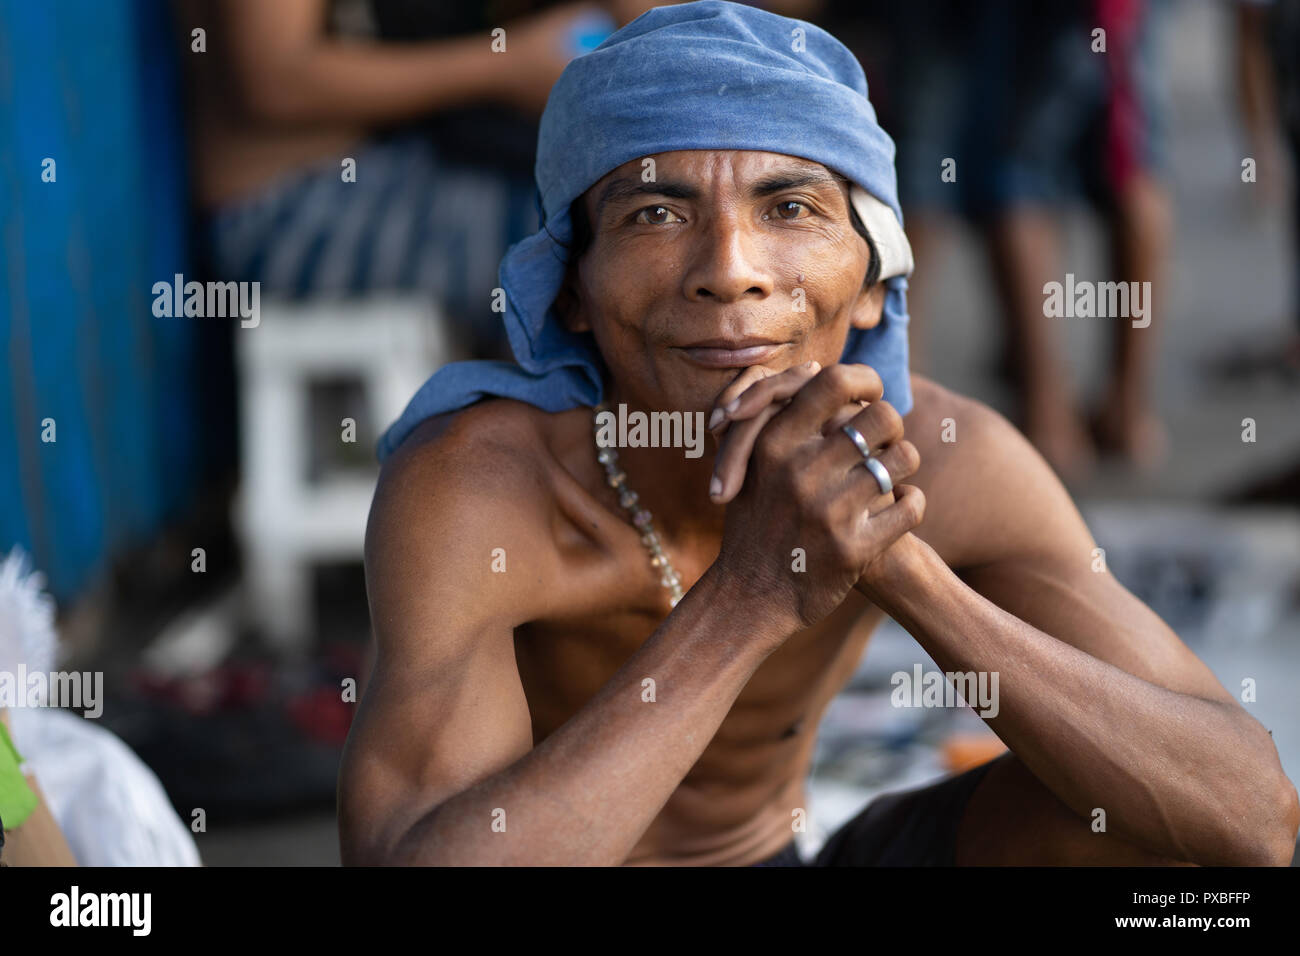 A Filipino man poses for a portrait on a sidewalk within Cebu City,Philippines Stock Photo